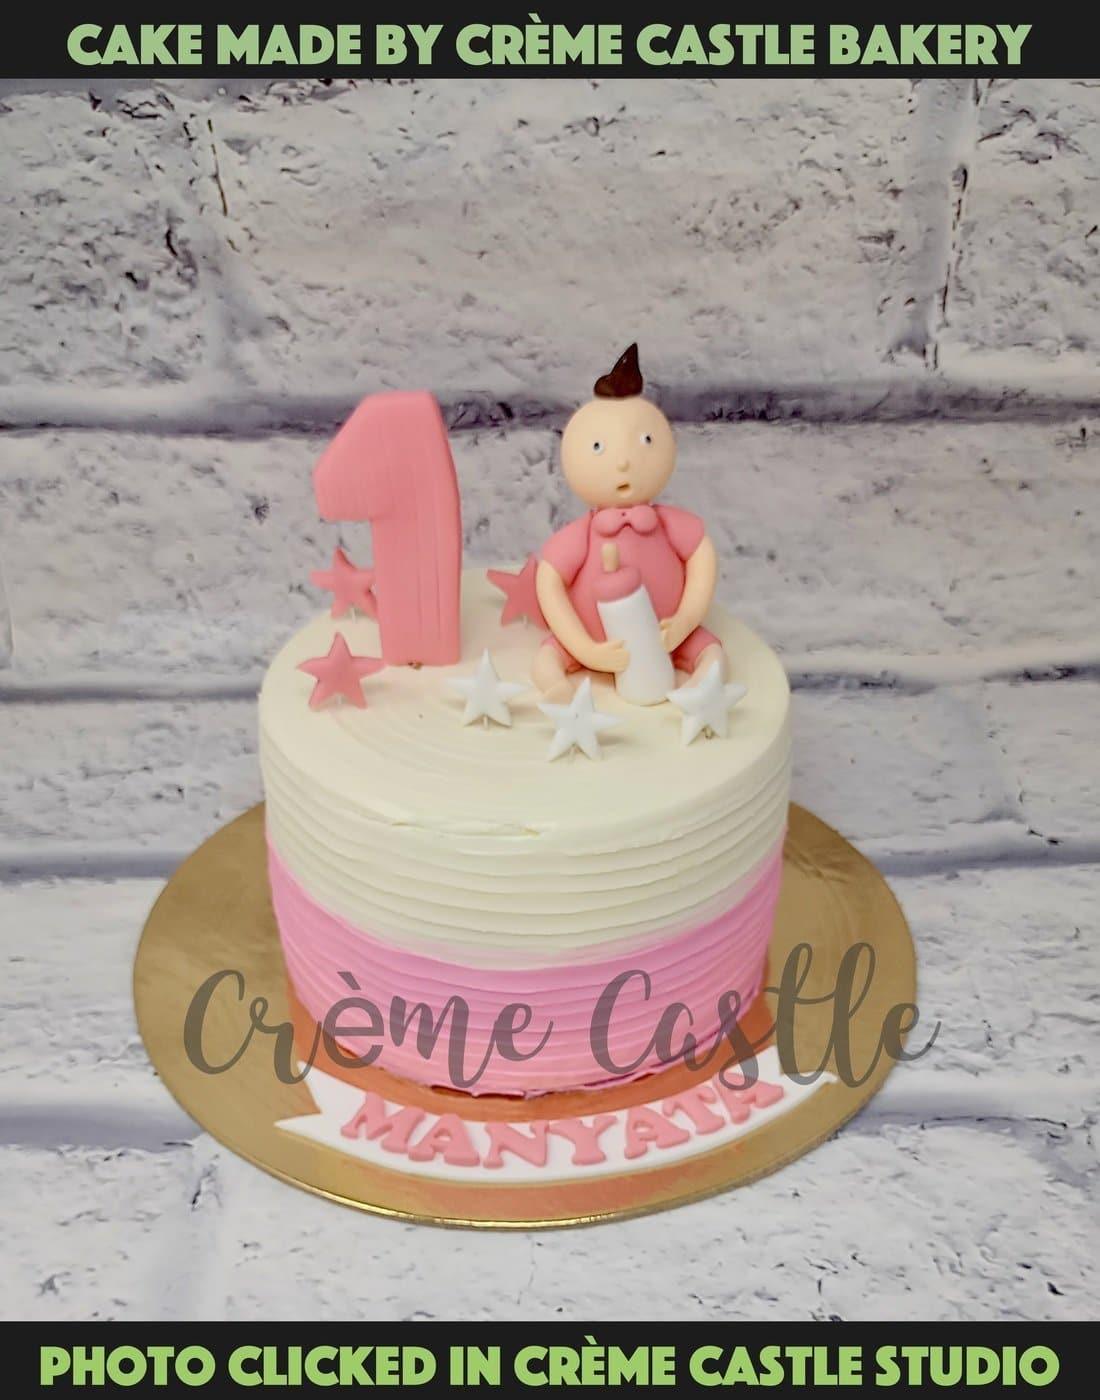 Customized 1 Month Anniversary Cake | Happy One Month Anniversary Cake |  Romantic Anniversary Cake - The Baker's Table